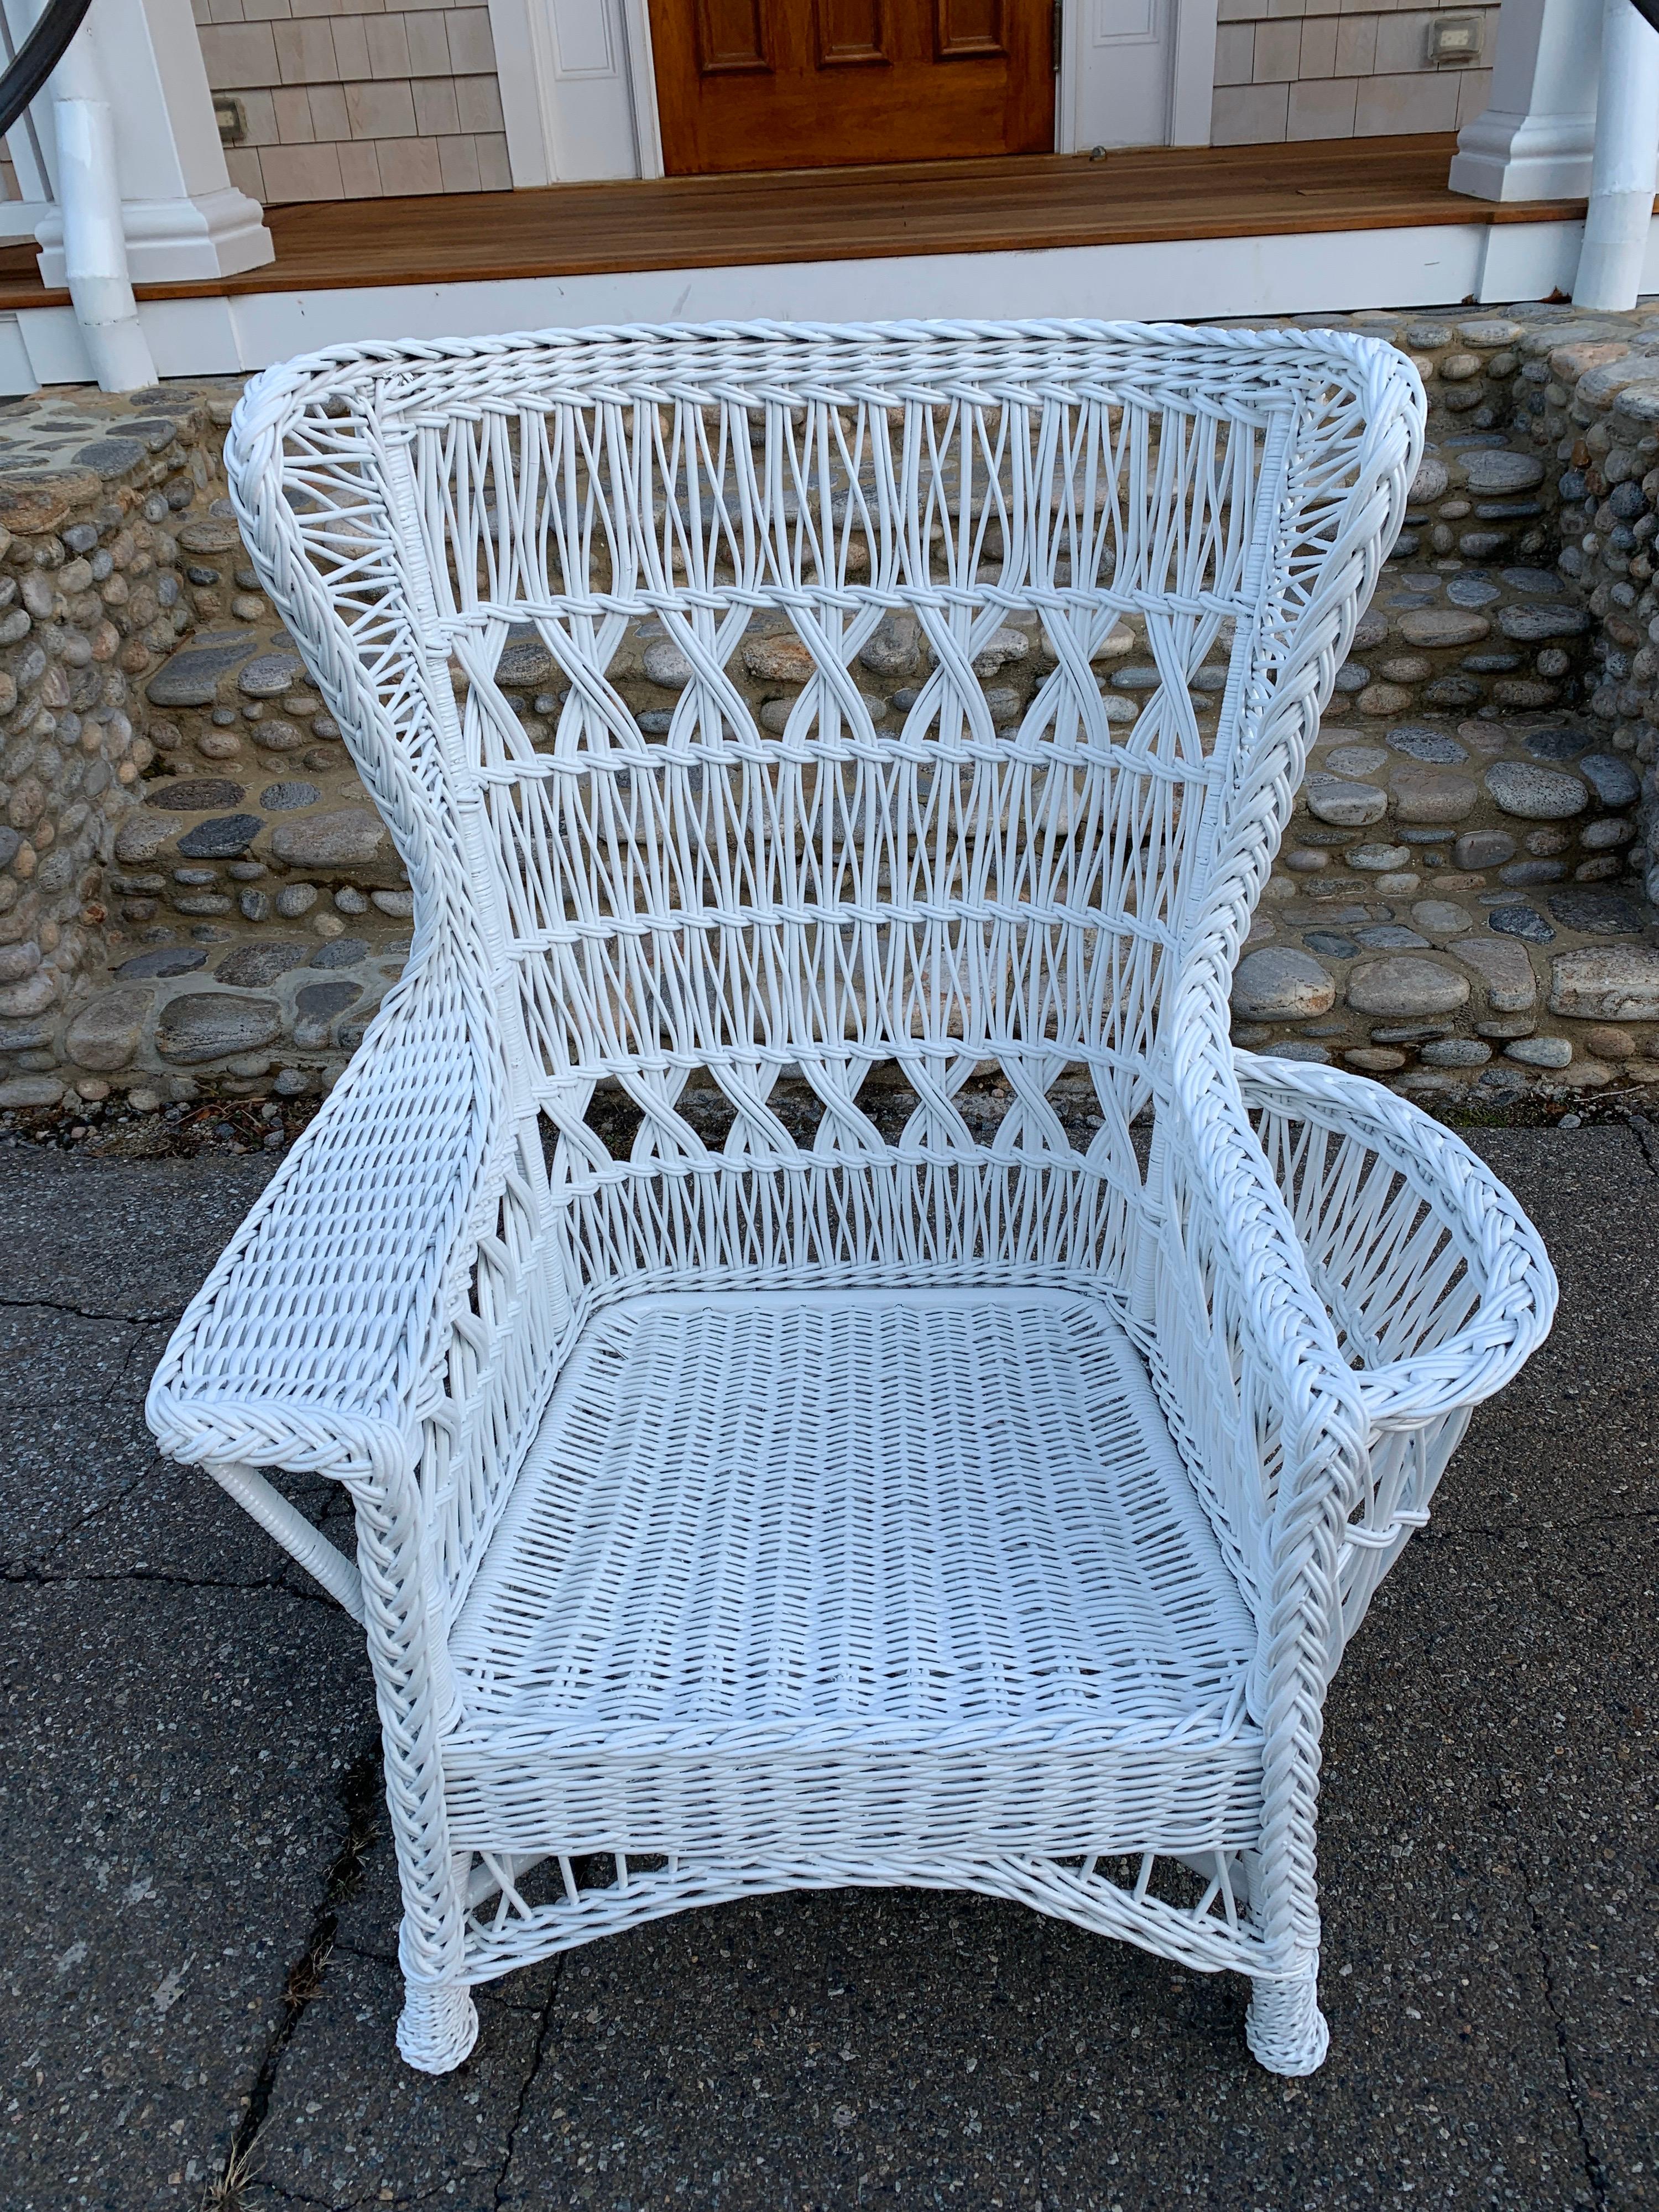 A special antique wicker wingback armchair in the triple cross pattern with magazine pocket and woven feet. Freshly painted white. Chair measures 36